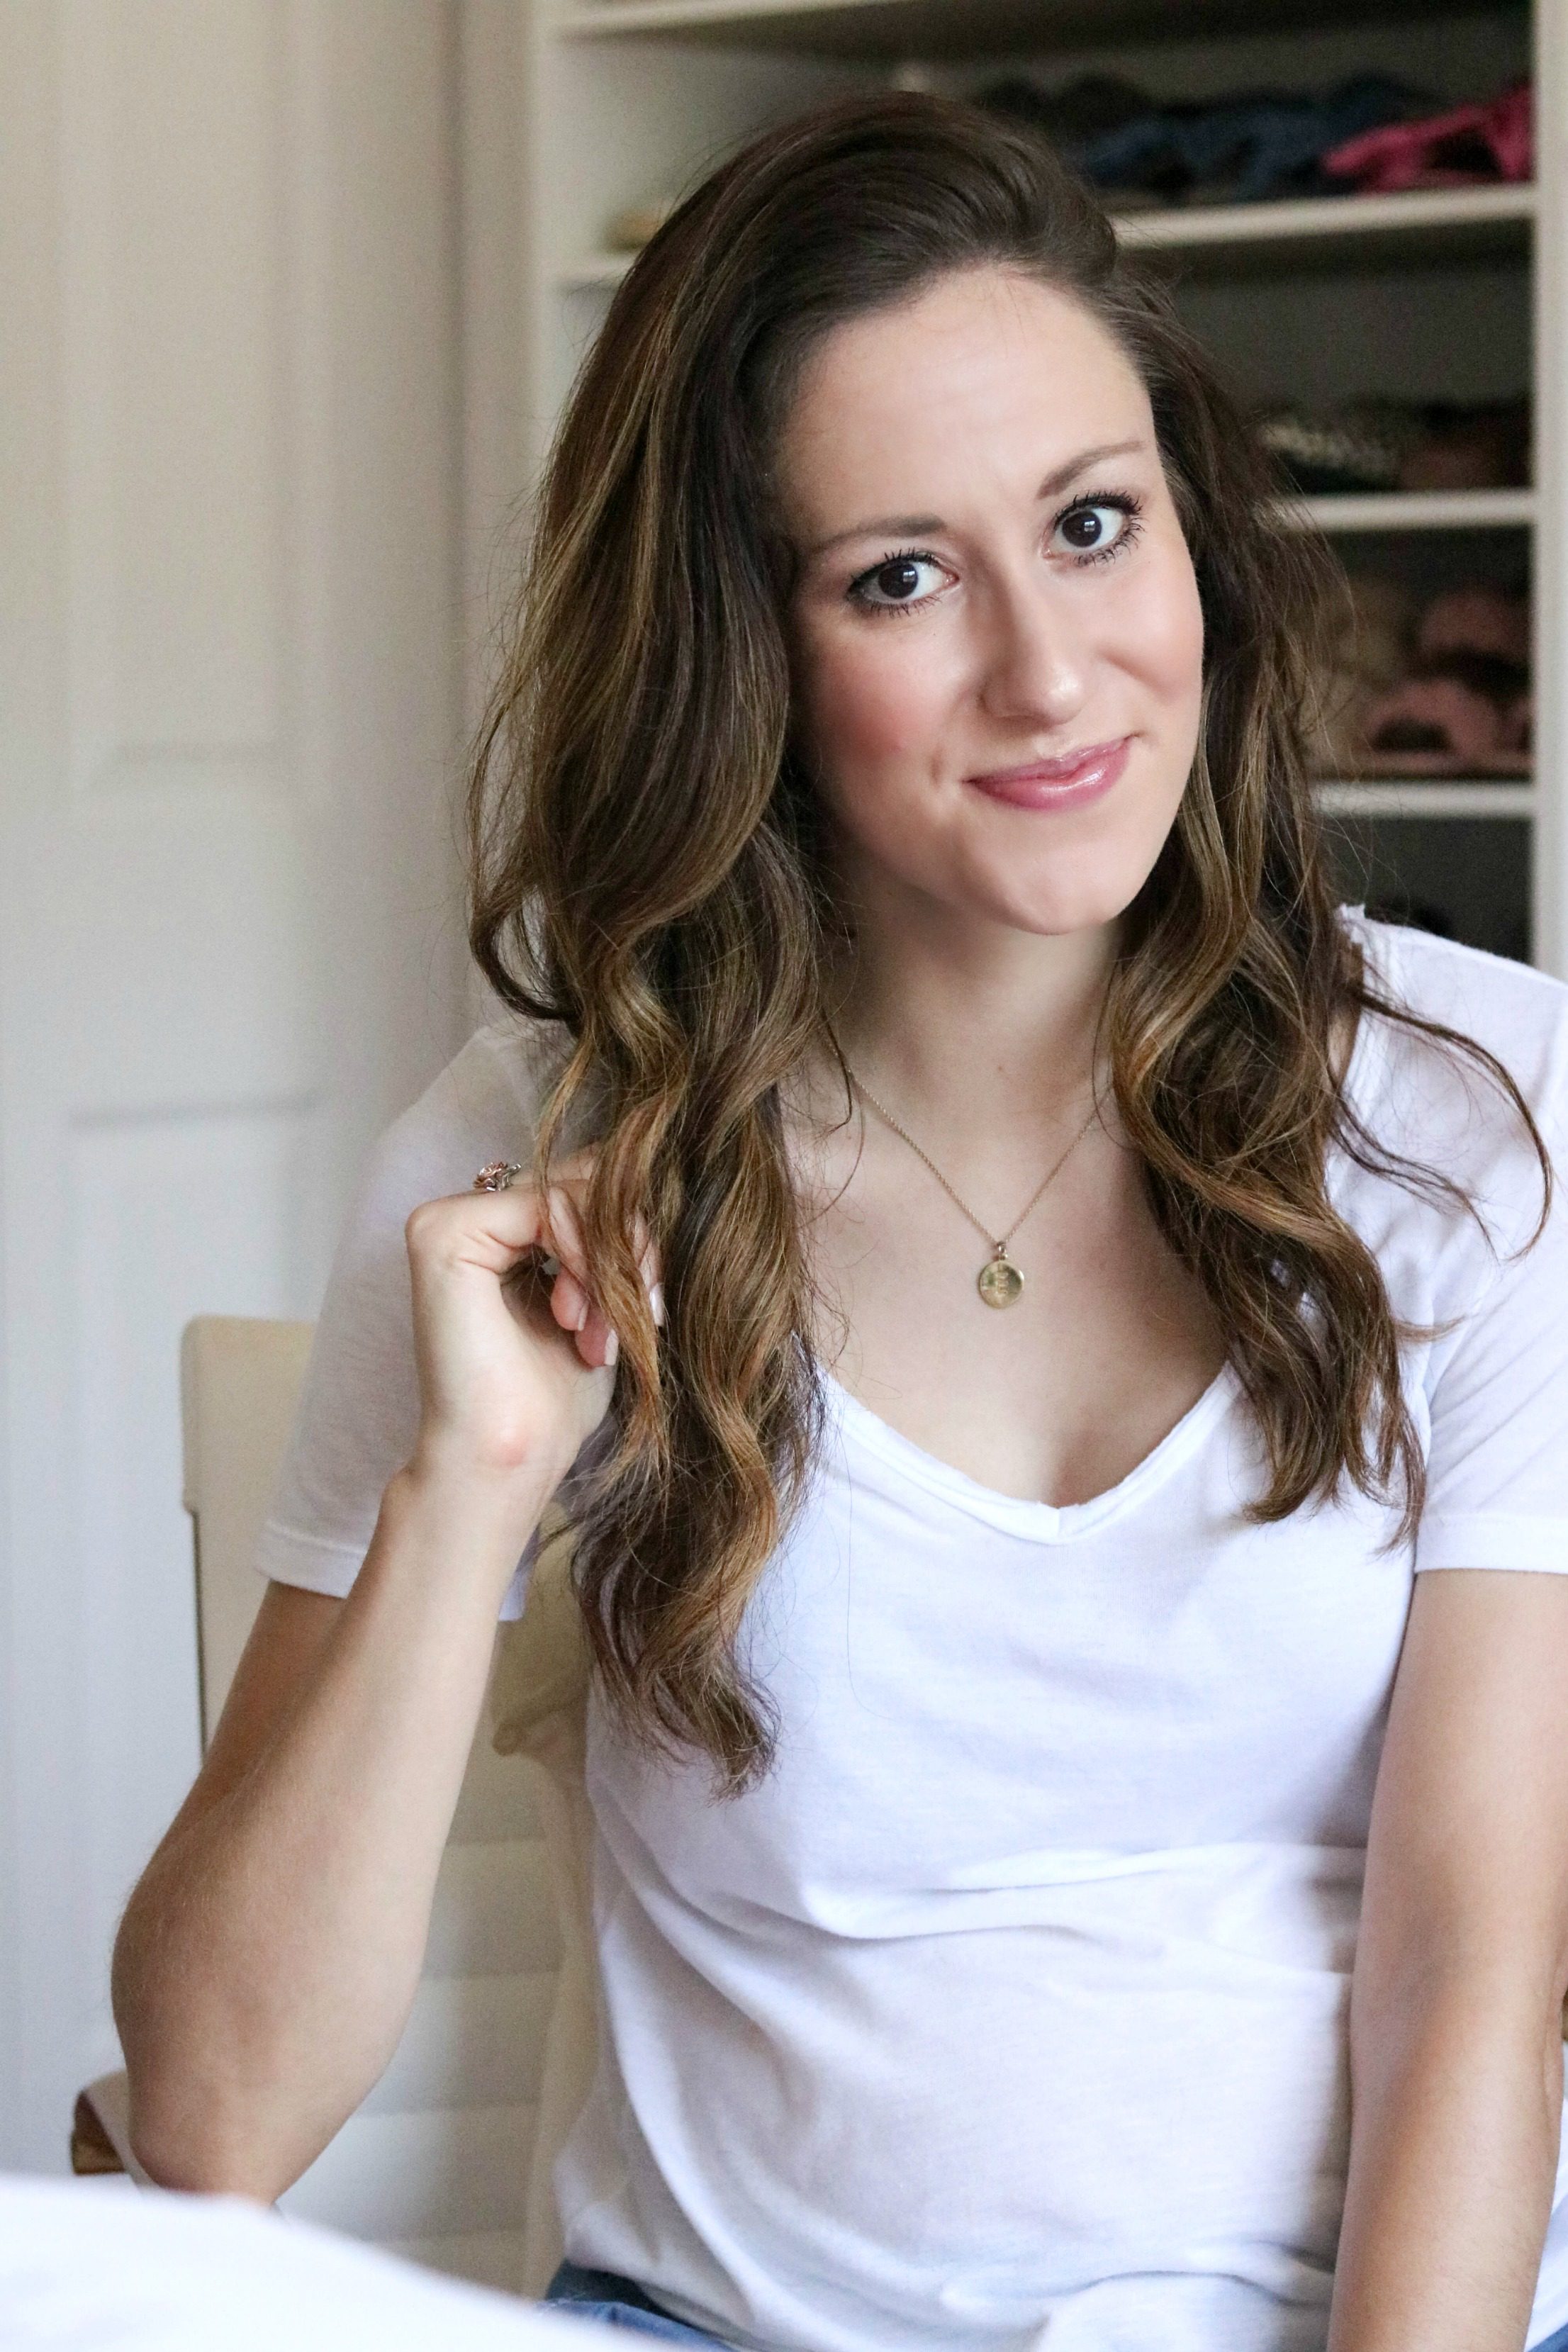 My EVERYDAY MAKEUP ROUTINE - Sharing my easy, go-to everyday look, with my friends at Olay!